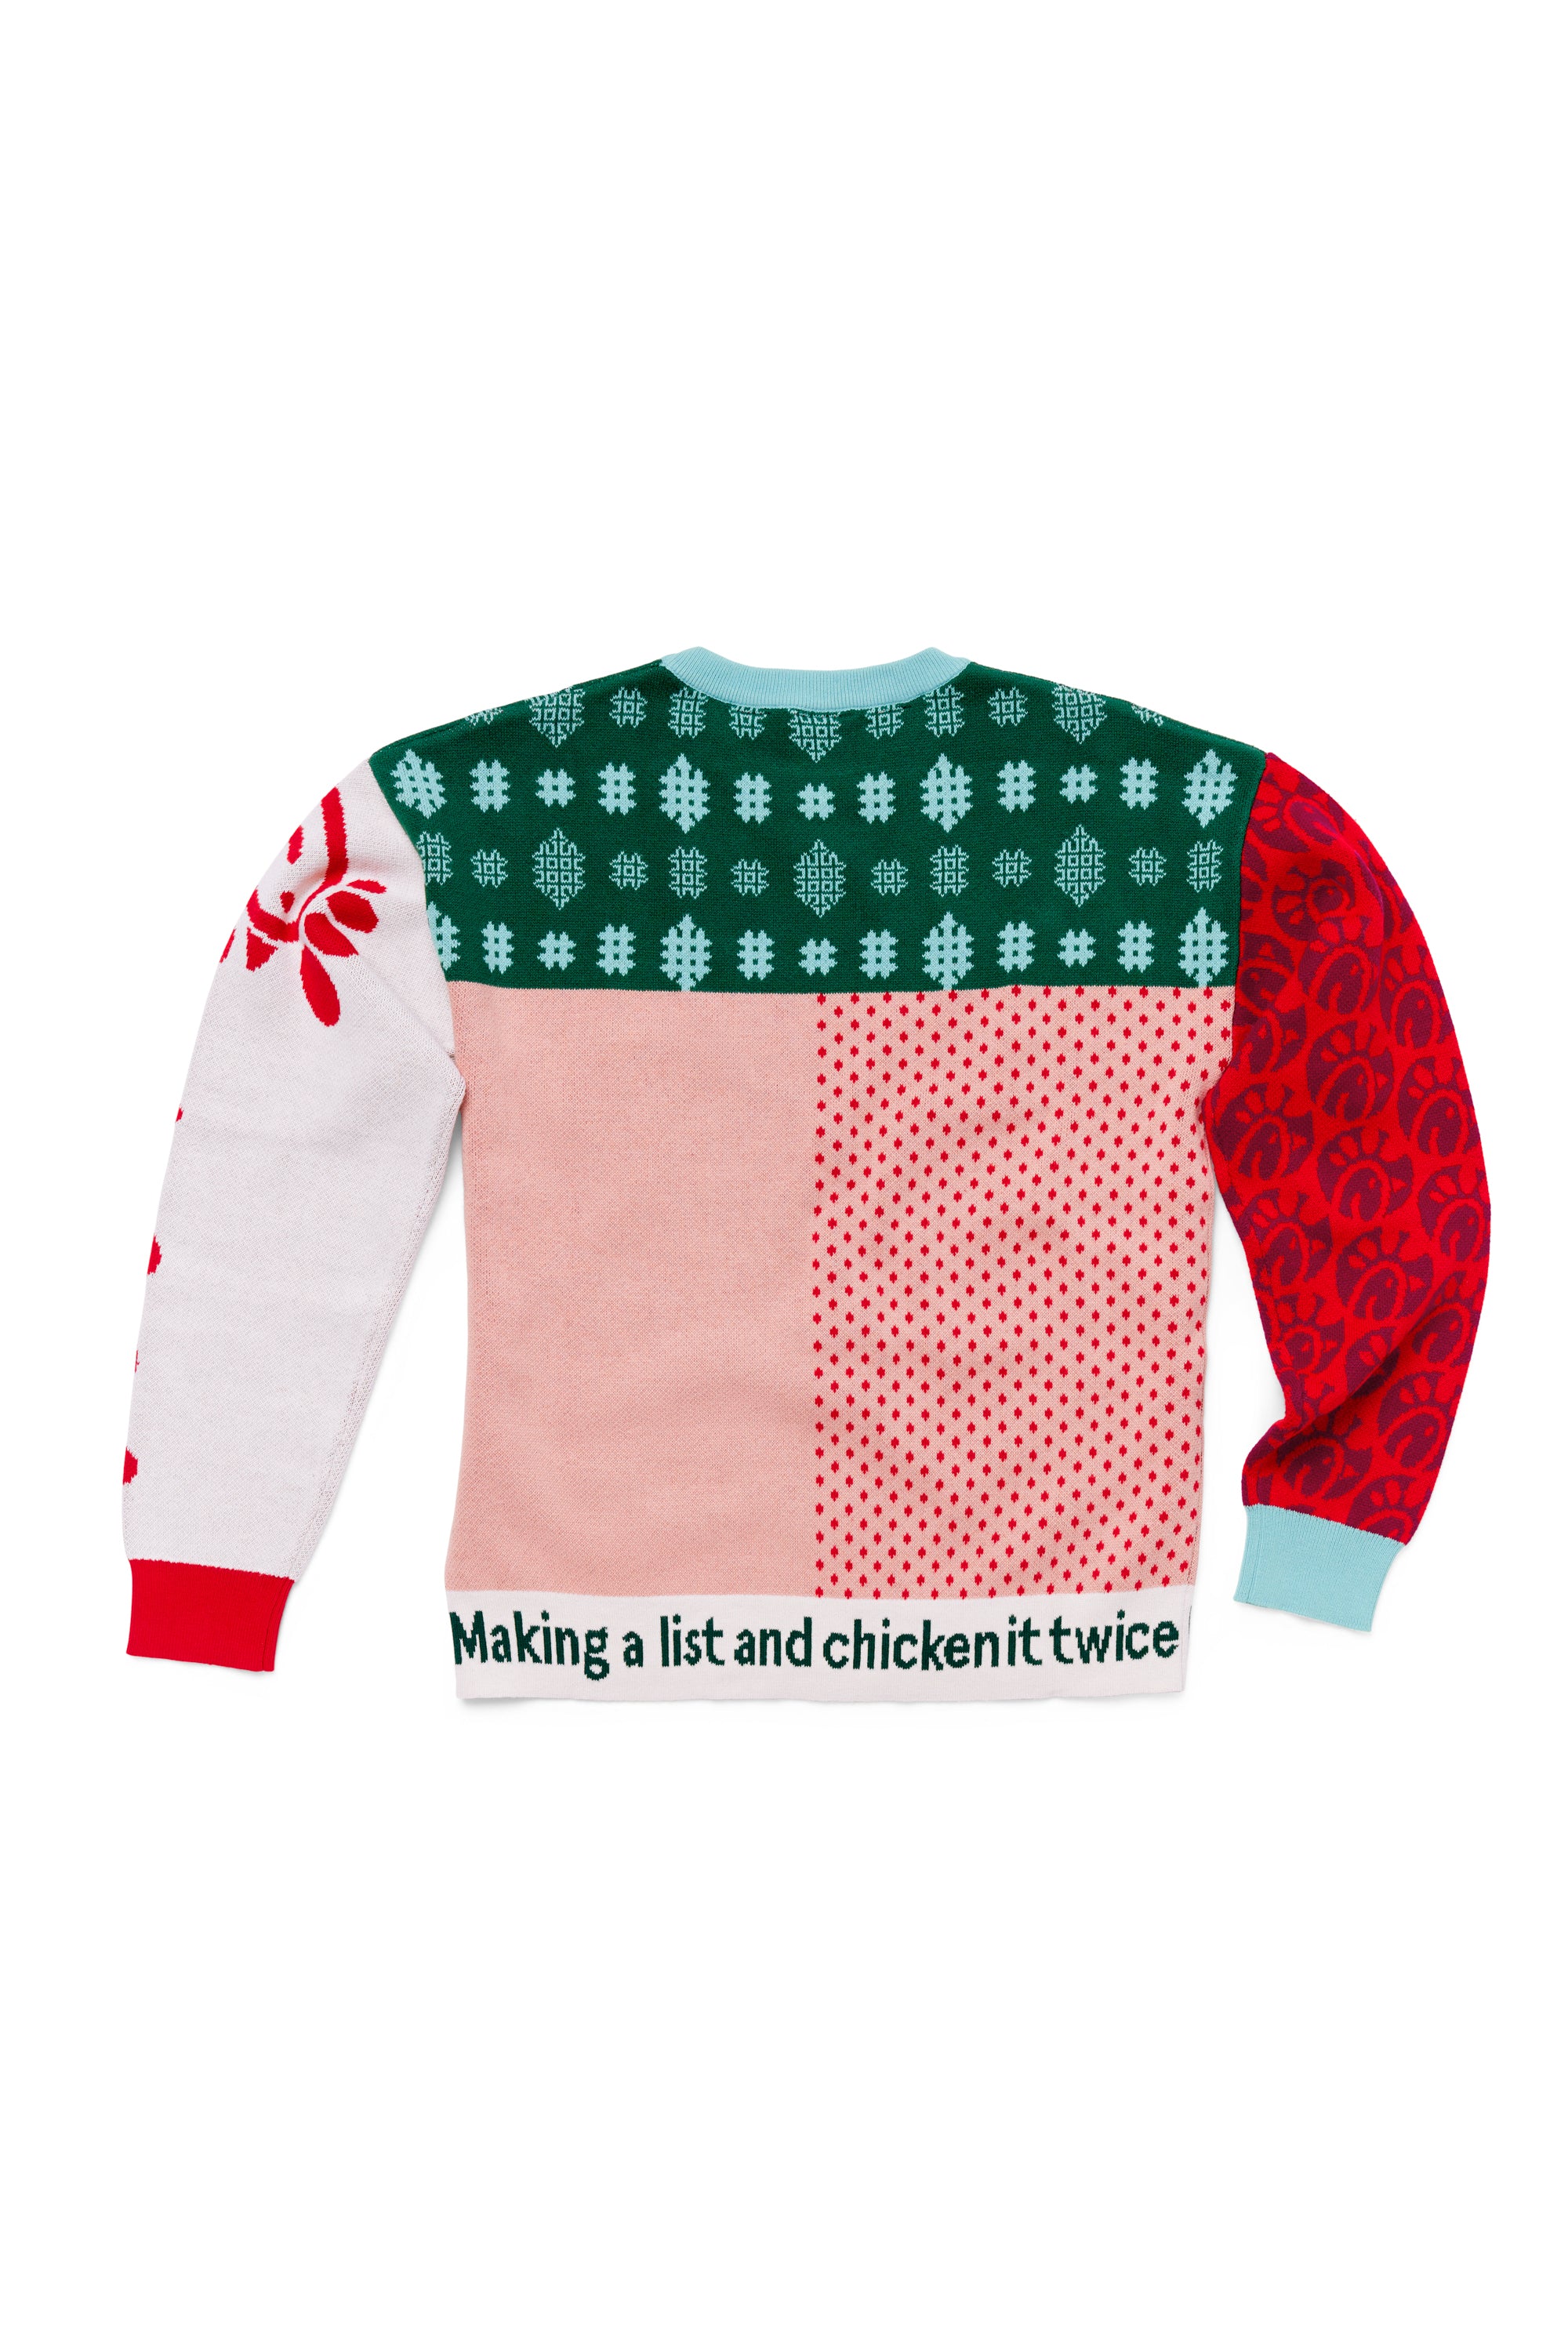 Back of Festive Fun Knit Sweater with festive waffle fry snowflake print colorblock body, Chick-fil-a logo print sleeve, and Chick-fil-A script sleeve